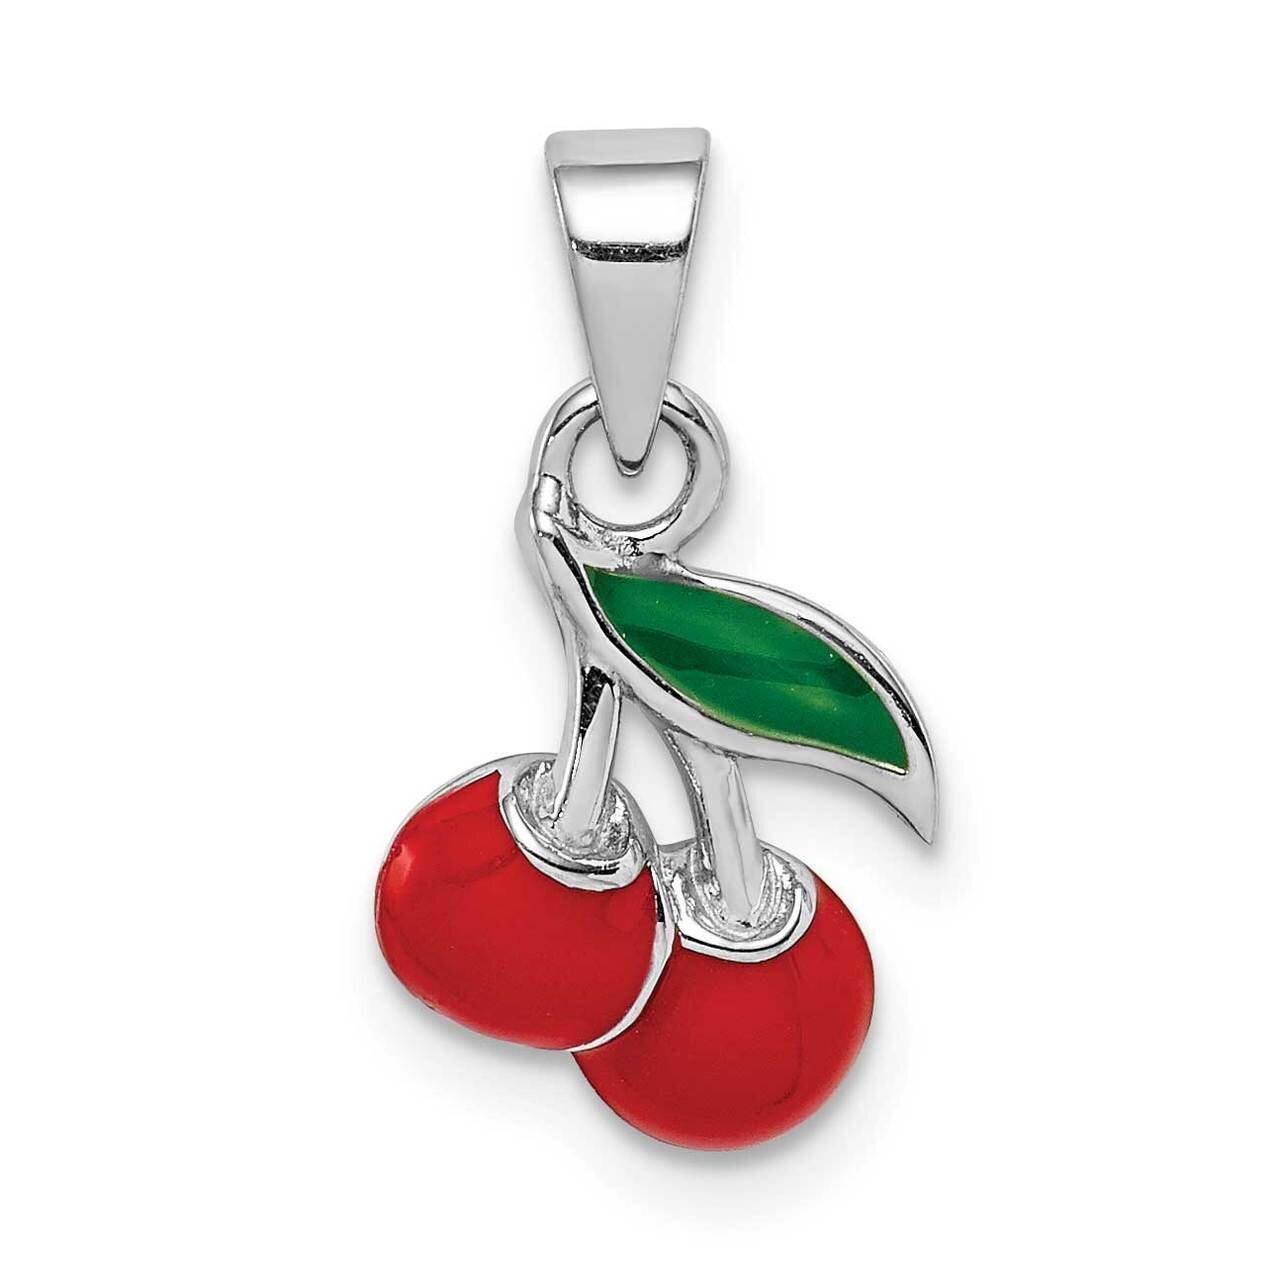 Childs Enameled Cherry Pendant Sterling Silver Rhodium-plated QC9647